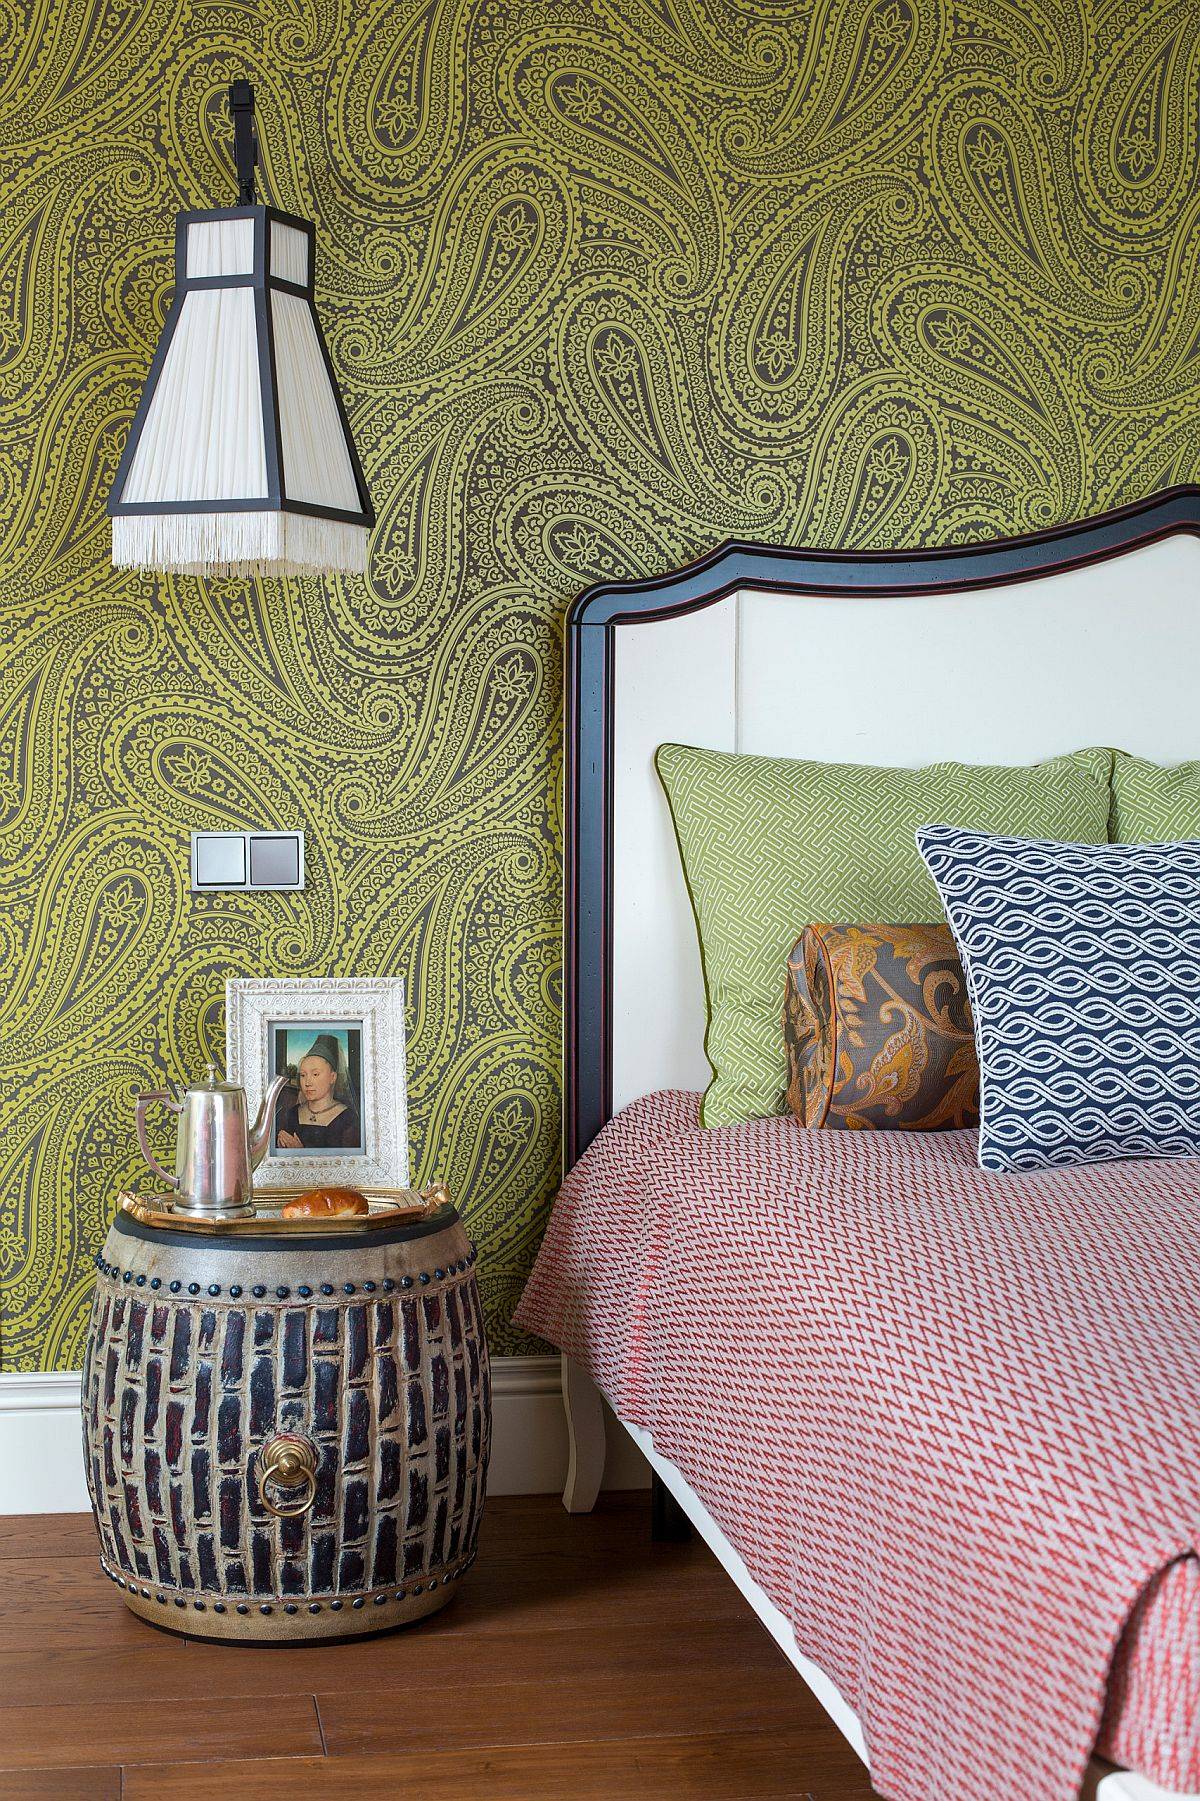 Lovely green wallpaper in Paisley pattern brings both color and contrast to this urbane. small bedroom